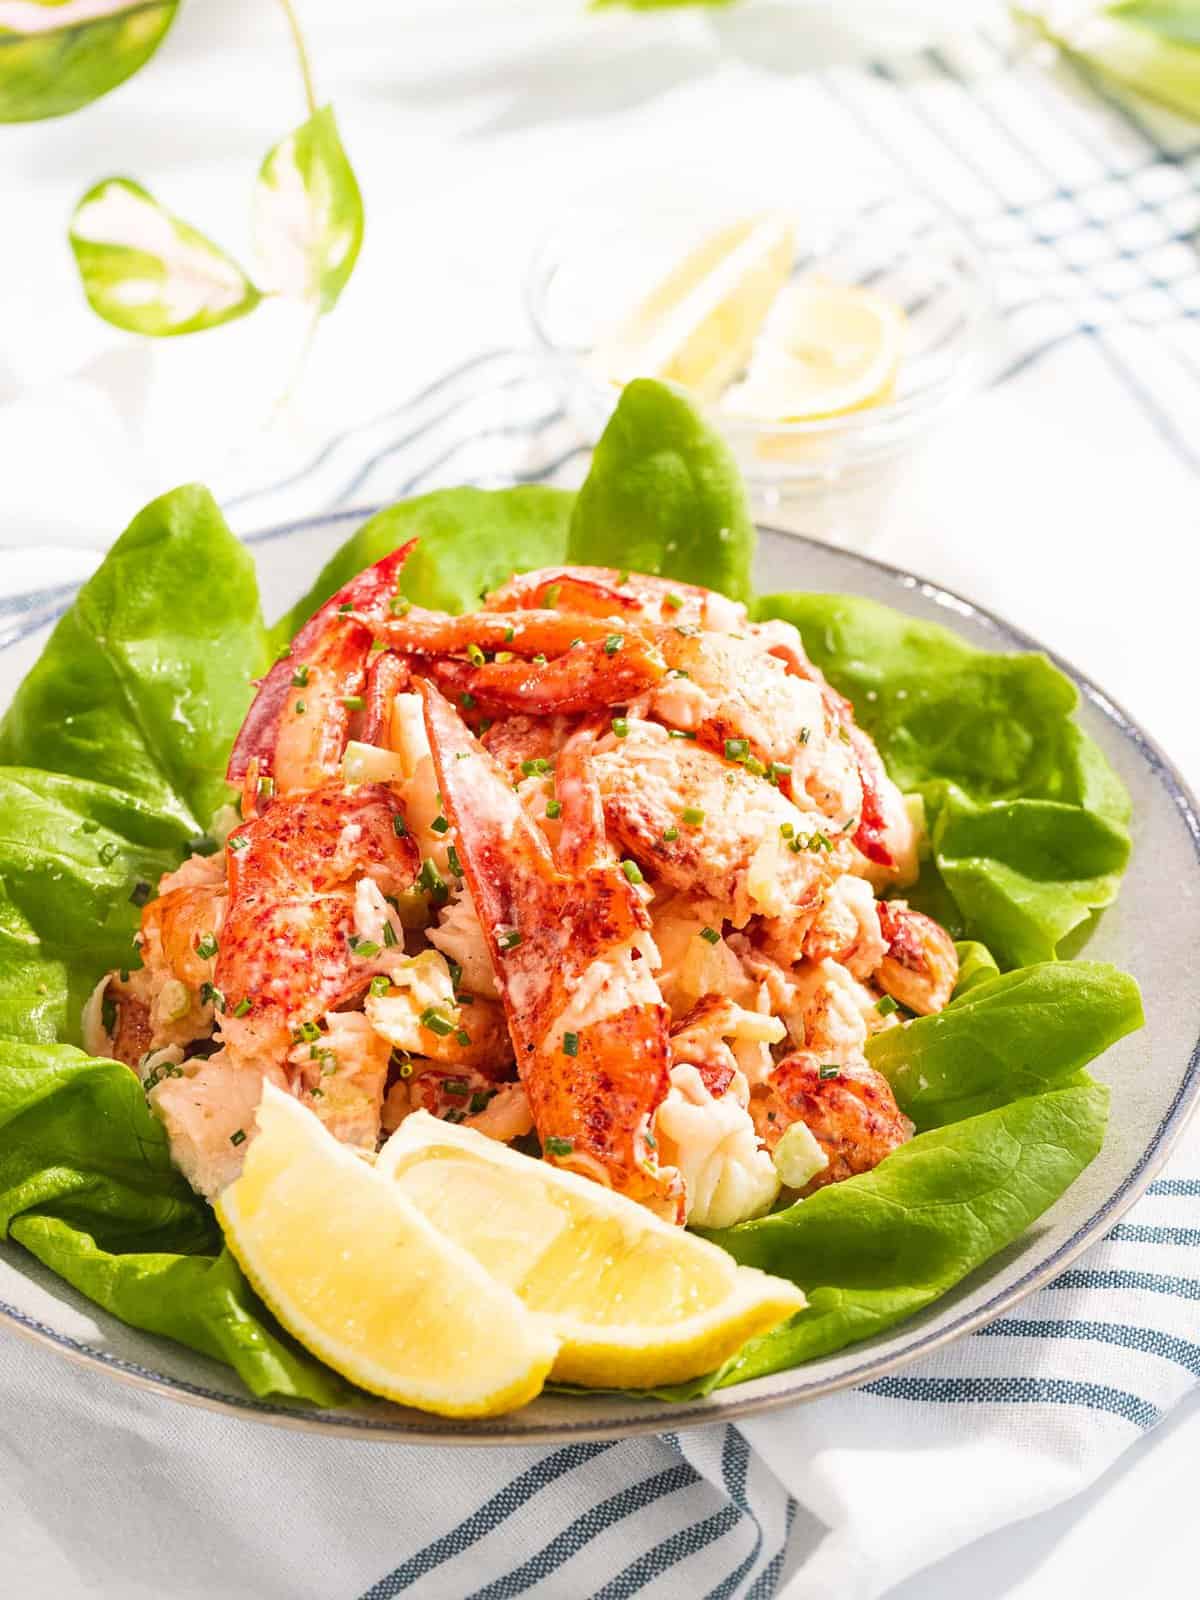 Lobster salad with mayo dressing on top of lettuce.